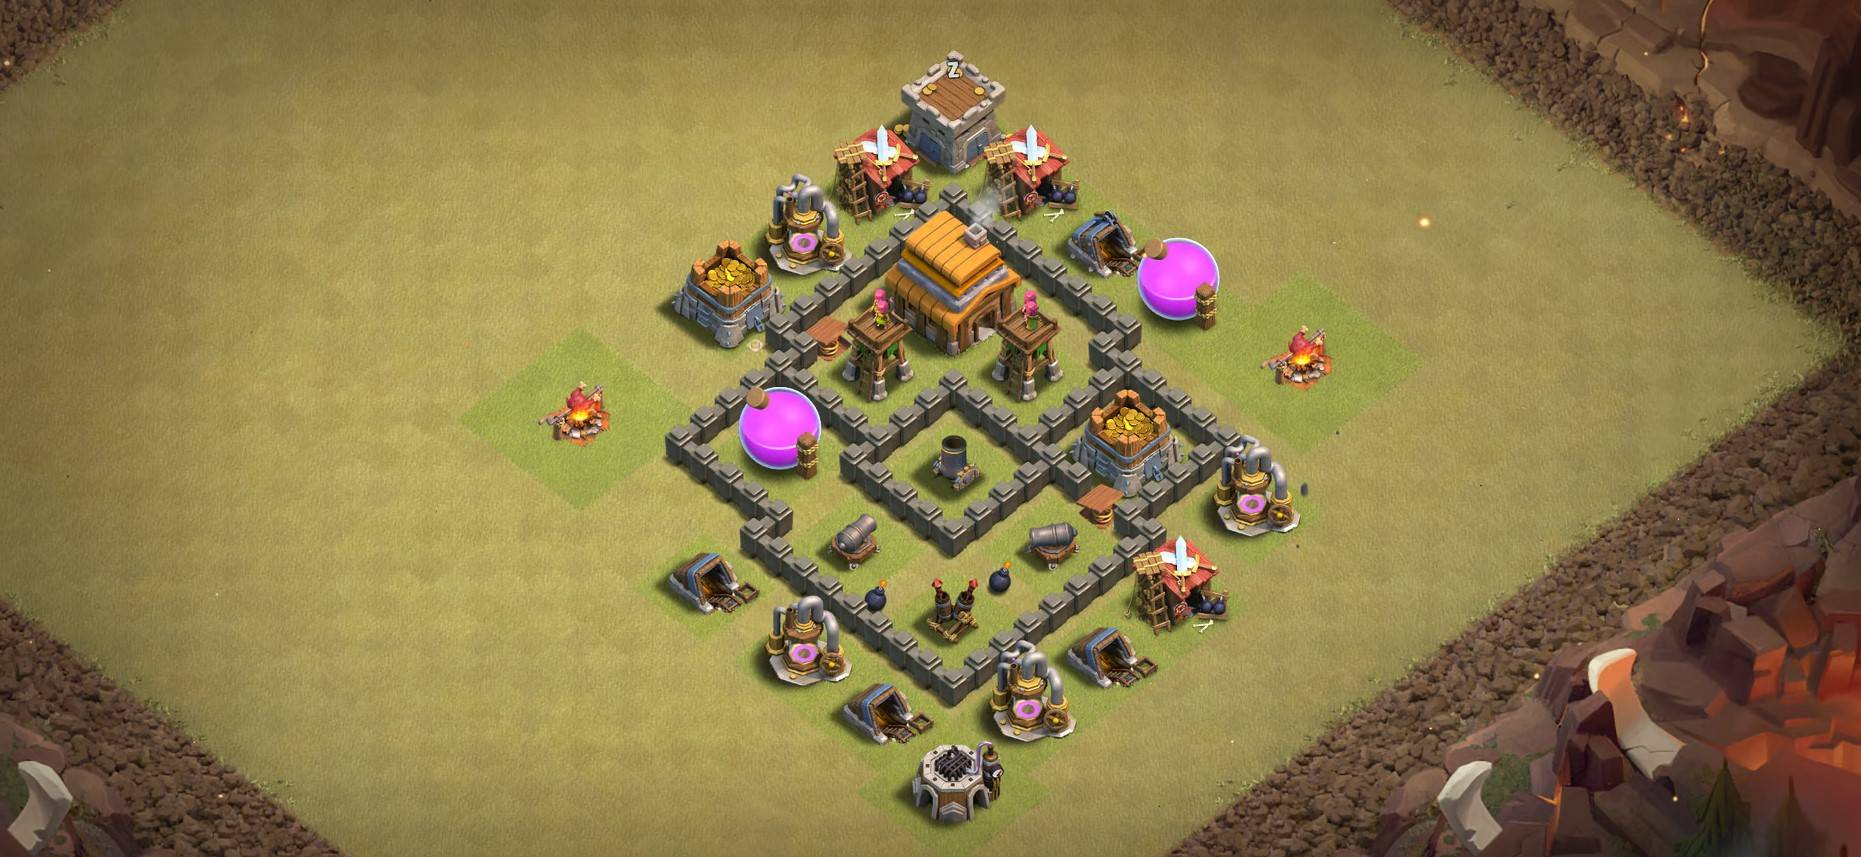 coc town hall 4 hybrid layout design link download